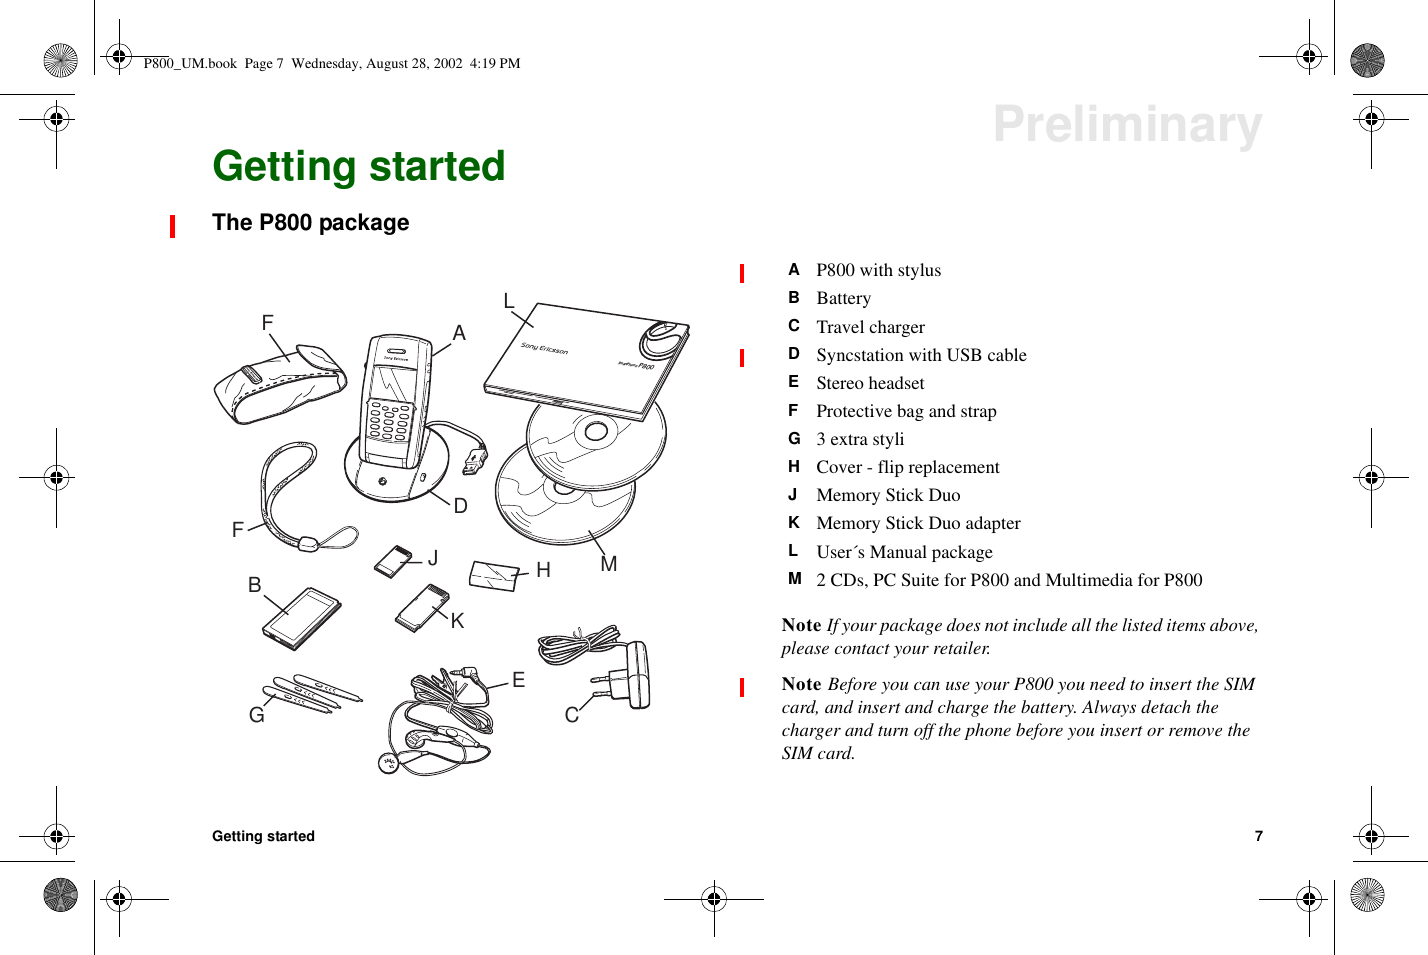 Getting started 7PreliminaryGetting startedThe P800 packageNote If your package does not include all the listed items above,please contact your retailer.Note Before you can use your P800 you need to insert the SIMcard, and insert and charge the battery. Always detach thecharger and turn off the phone before you insert or remove theSIM card.BCADEFFHJKMSmartPhoneP800LGAP800 with stylusBBatteryCTravel chargerDSyncstation with USB cableEStereo headsetFProtective bag and strapG3extrastyliHCover - flip replacementJMemory Stick DuoKMemory Stick Duo adapterLUser´s Manual packageM2 CDs, PC Suite for P800 and Multimedia for P800P800_UM.book Page 7 Wednesday, August 28, 2002 4:19 PM